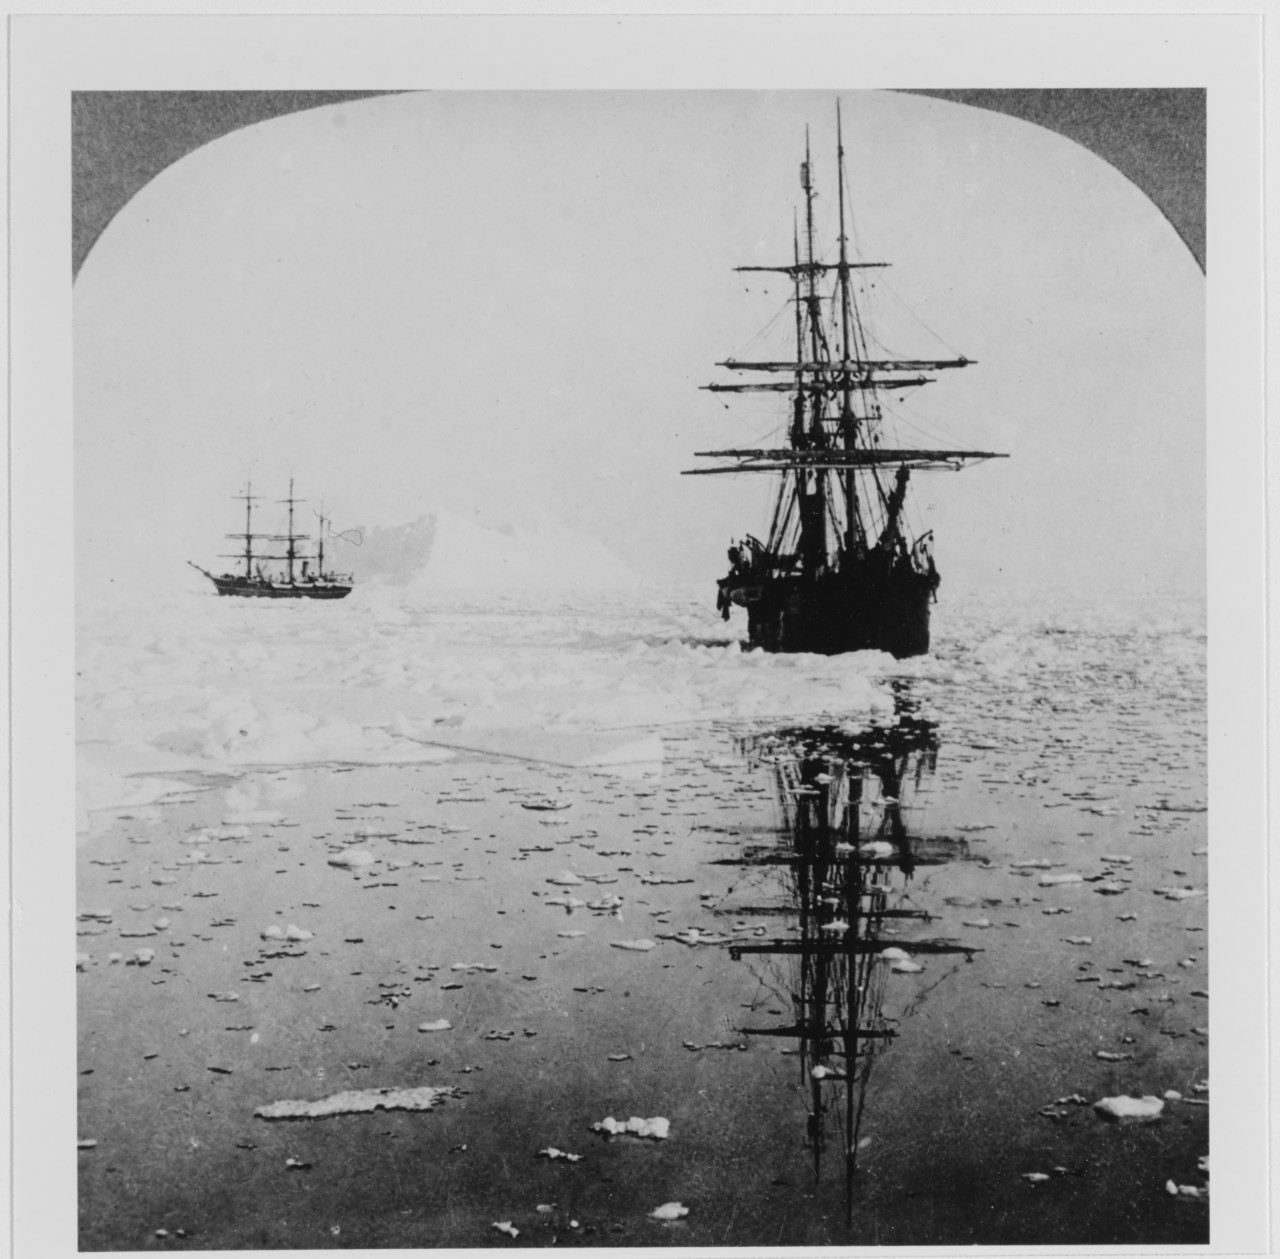 Whalers DIANA and NOVA ZEMBLA cruising in the icy waters of Dexterity Harbor, off Baffin Island, circa the early 1900s